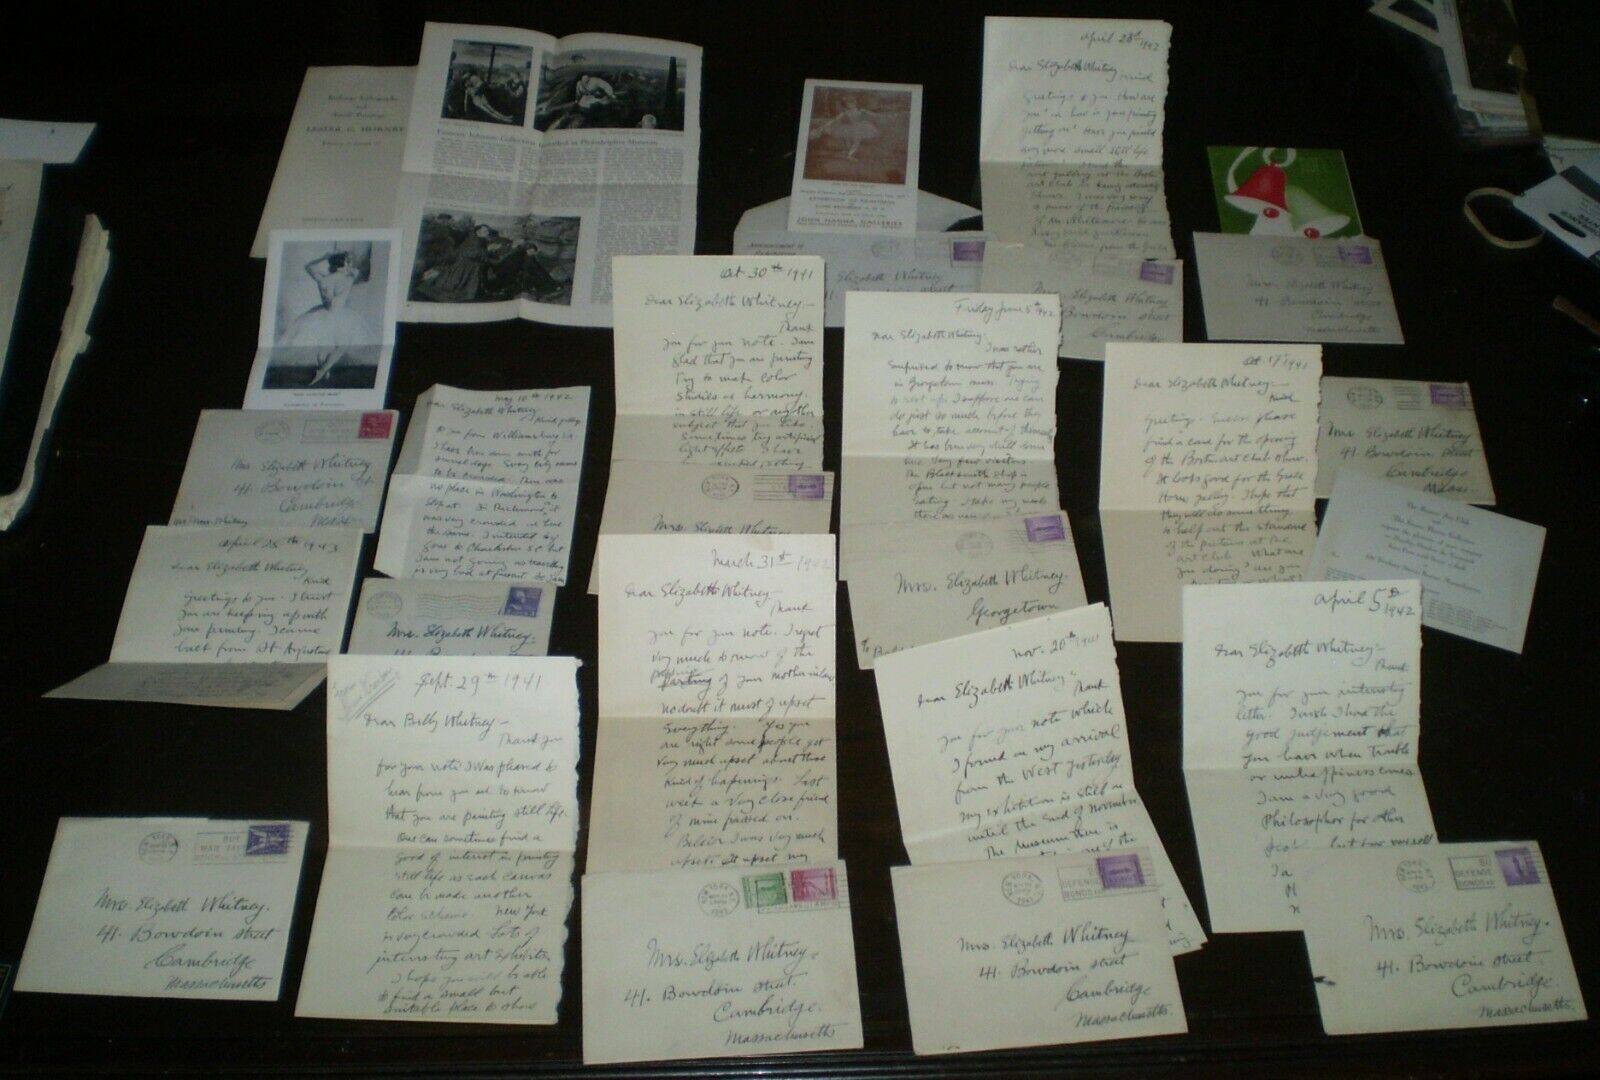 ARCHIVE OF LETTERS FROM ARTIST LOUIS KRONBERG TO ELIZABETH WHITNEY, 1940's